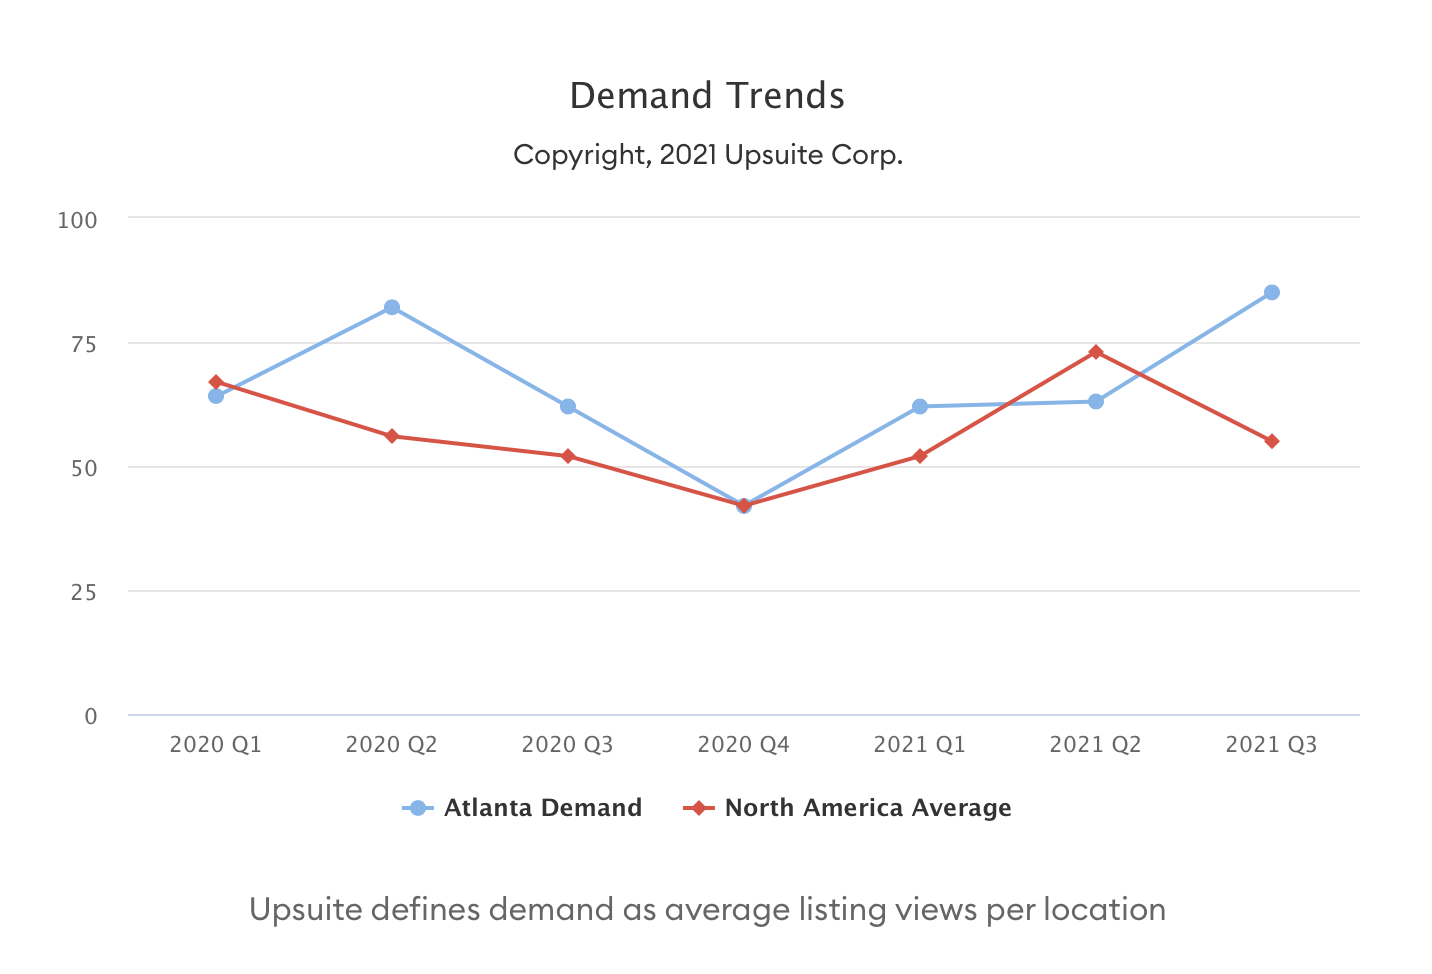 Demand for Flexible Office fell in some markets in Q3 2021